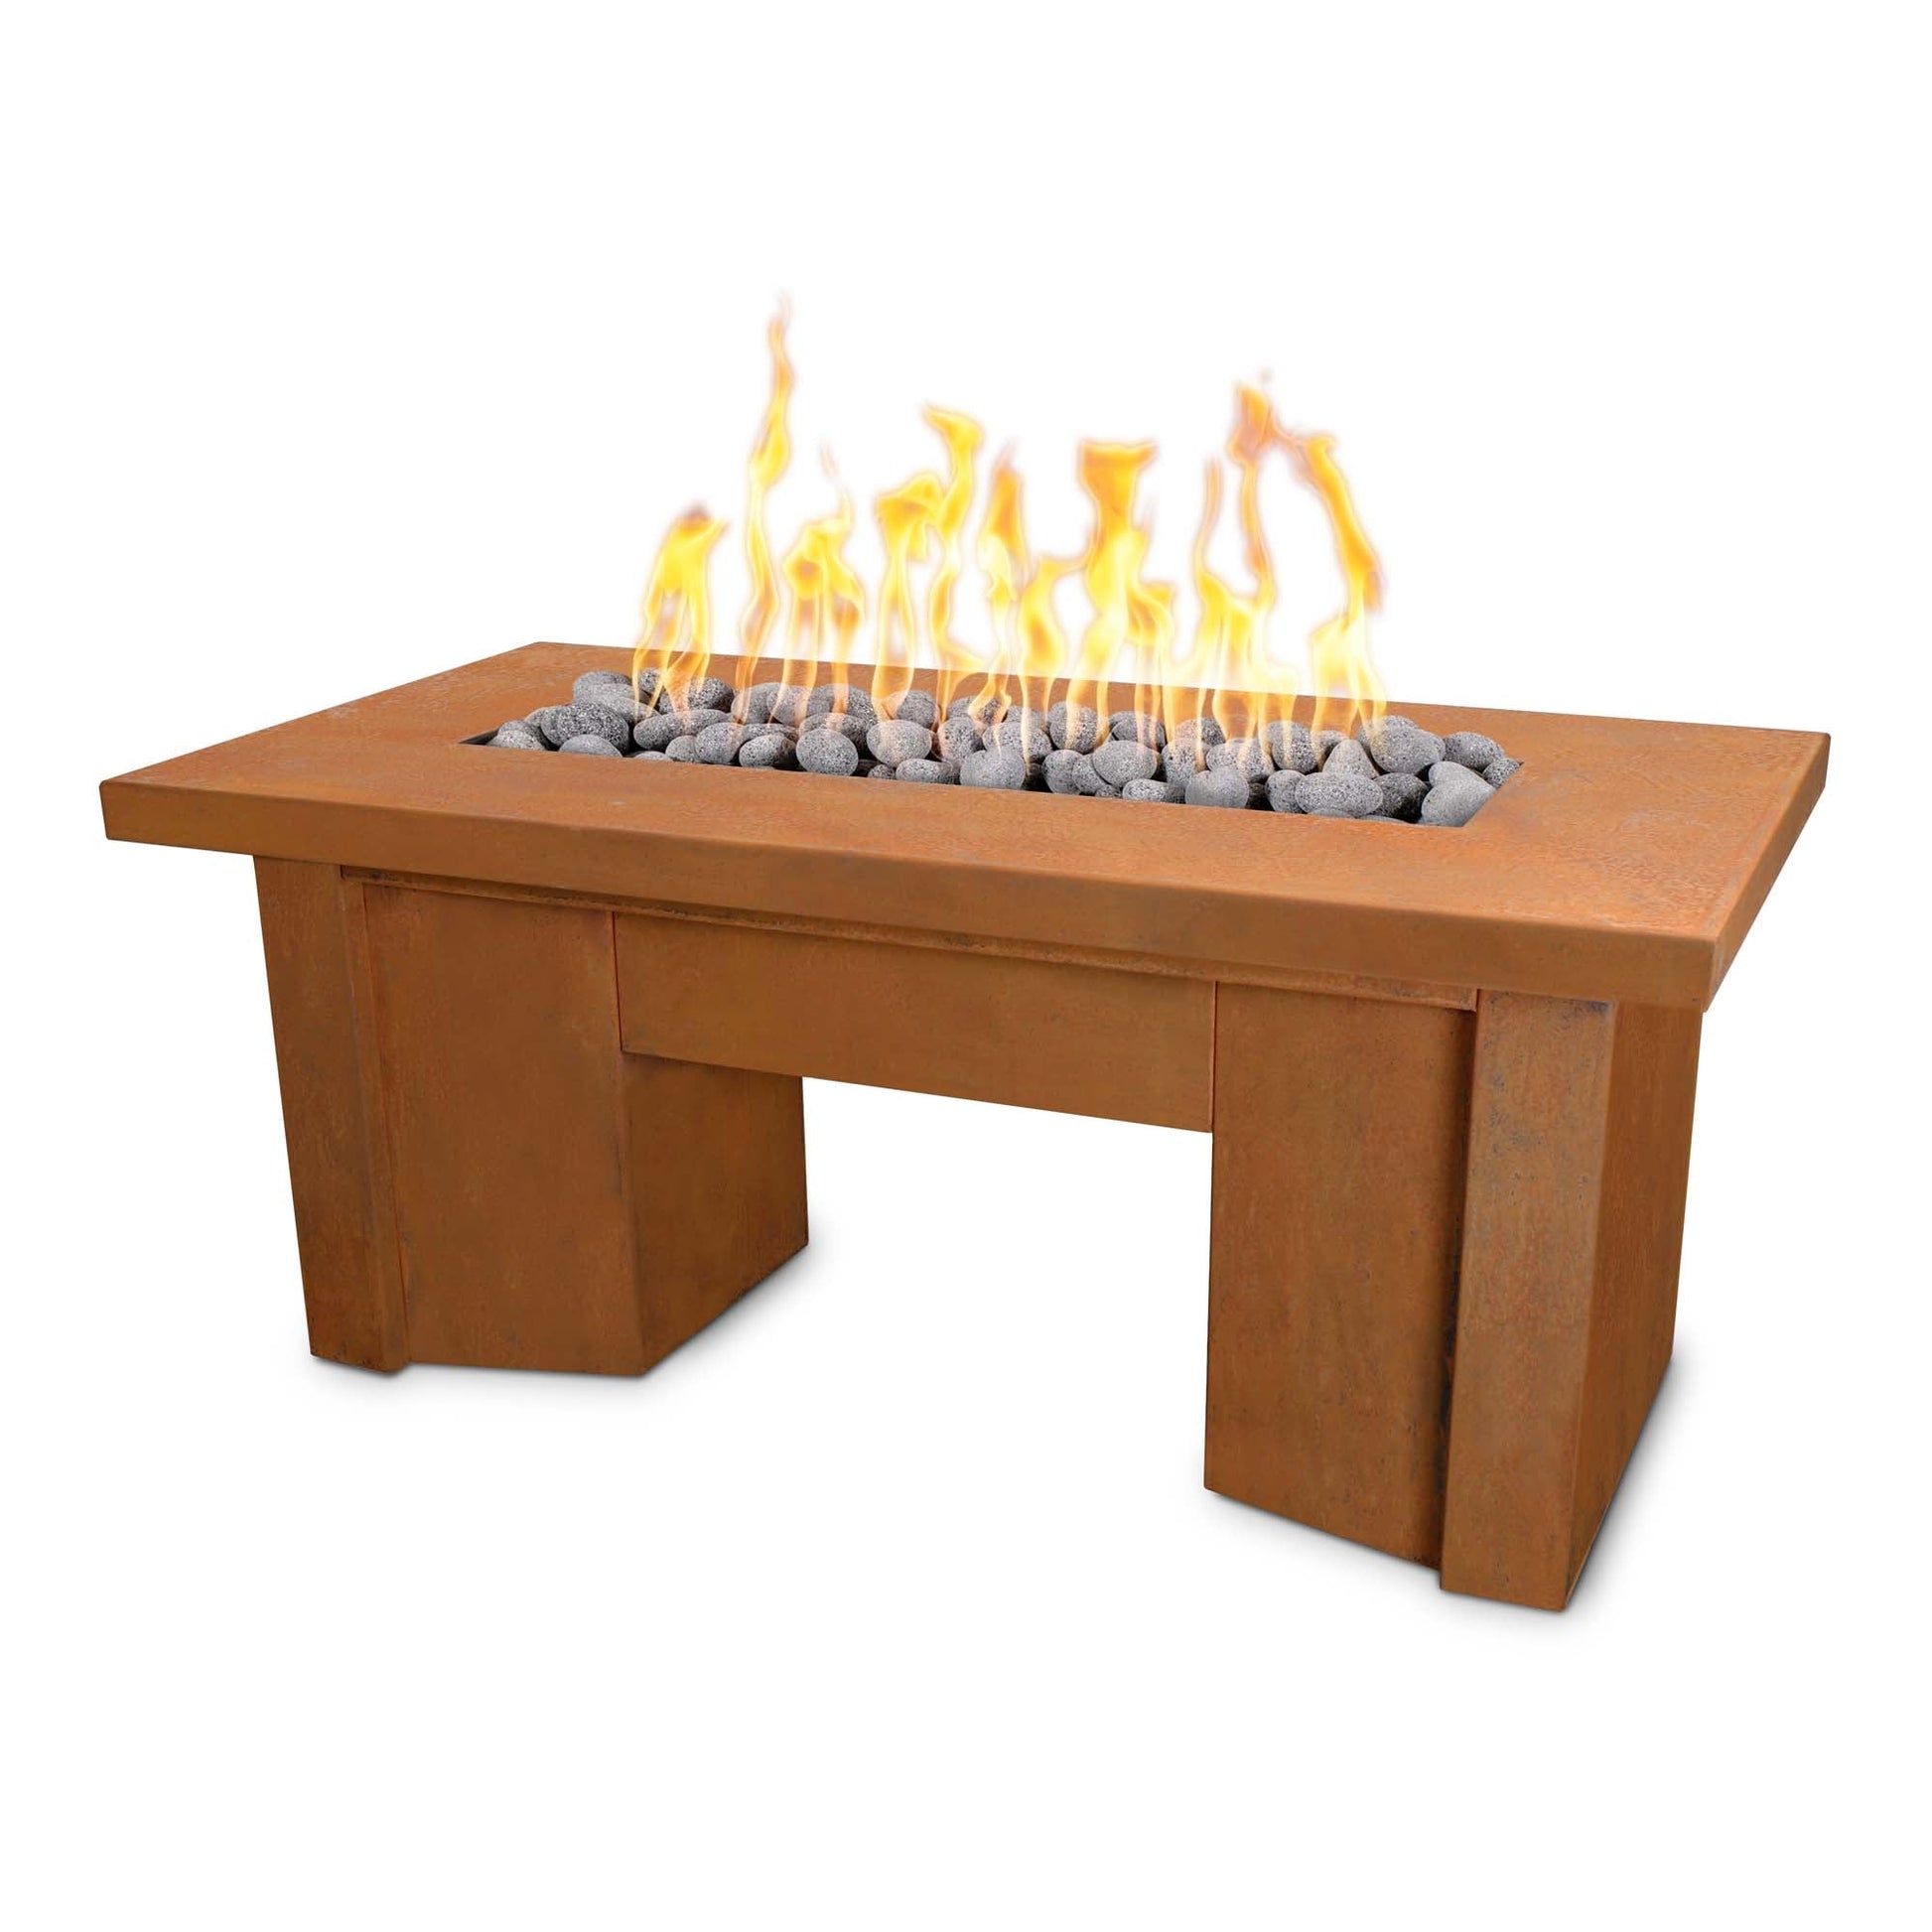 The Outdoor Plus Rectangular Alameda 78" Corten Steel Liquid Propane Fire Pit with 12V Electronic Ignition